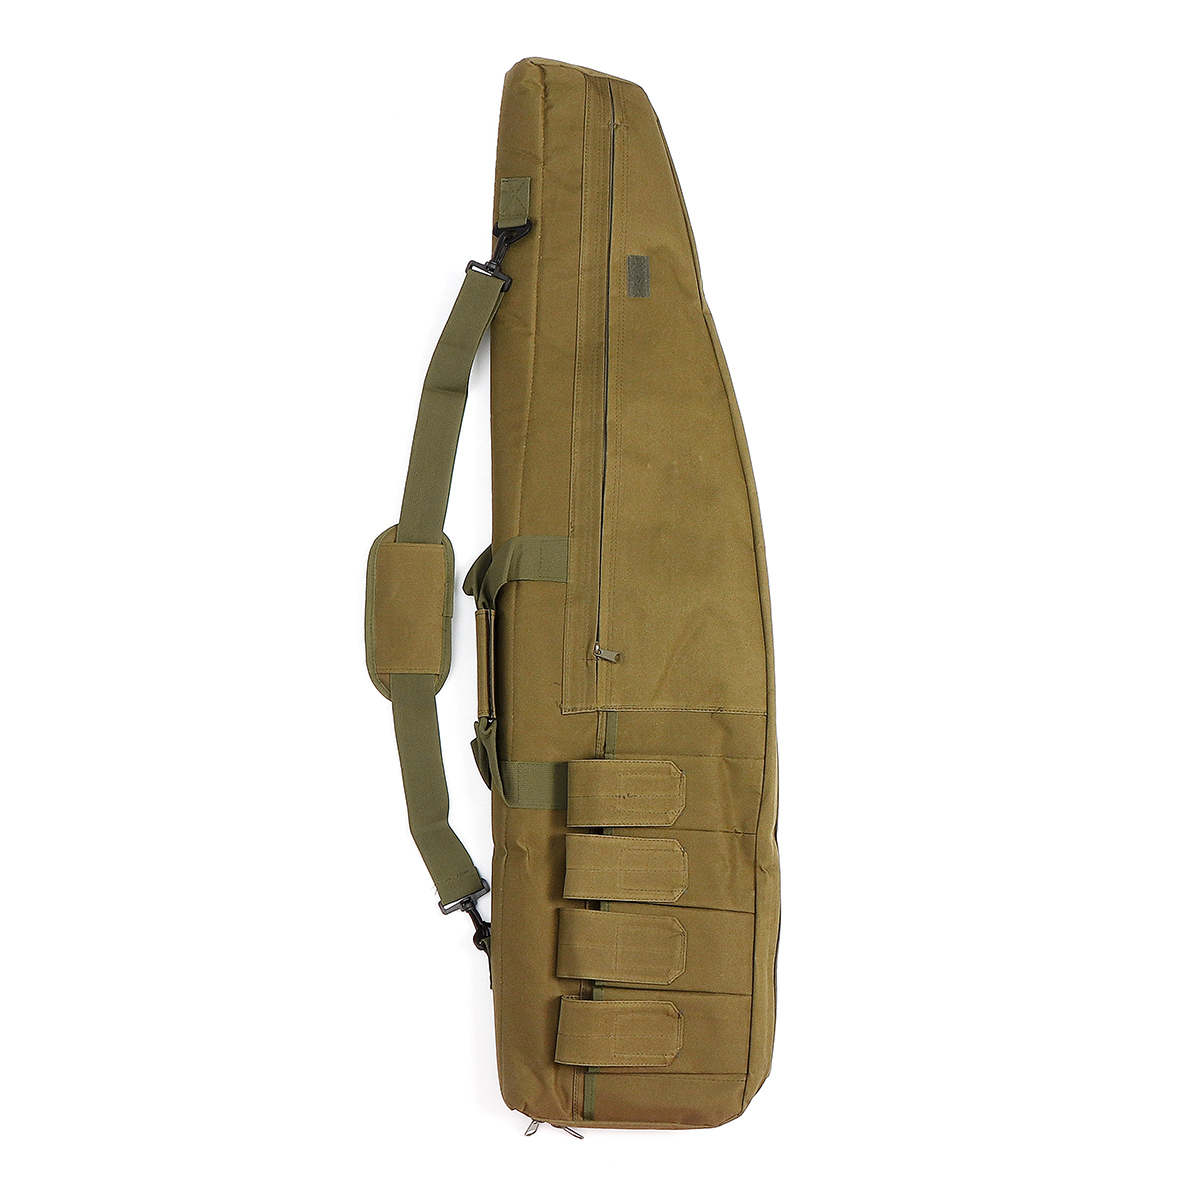 100x25x5cm-Outdoor-Hunting-Tactical-Bag-CS-Airsoft-Case-Tactical-Package-Heavy-Duty-Hunting-Accessor-1519991-5